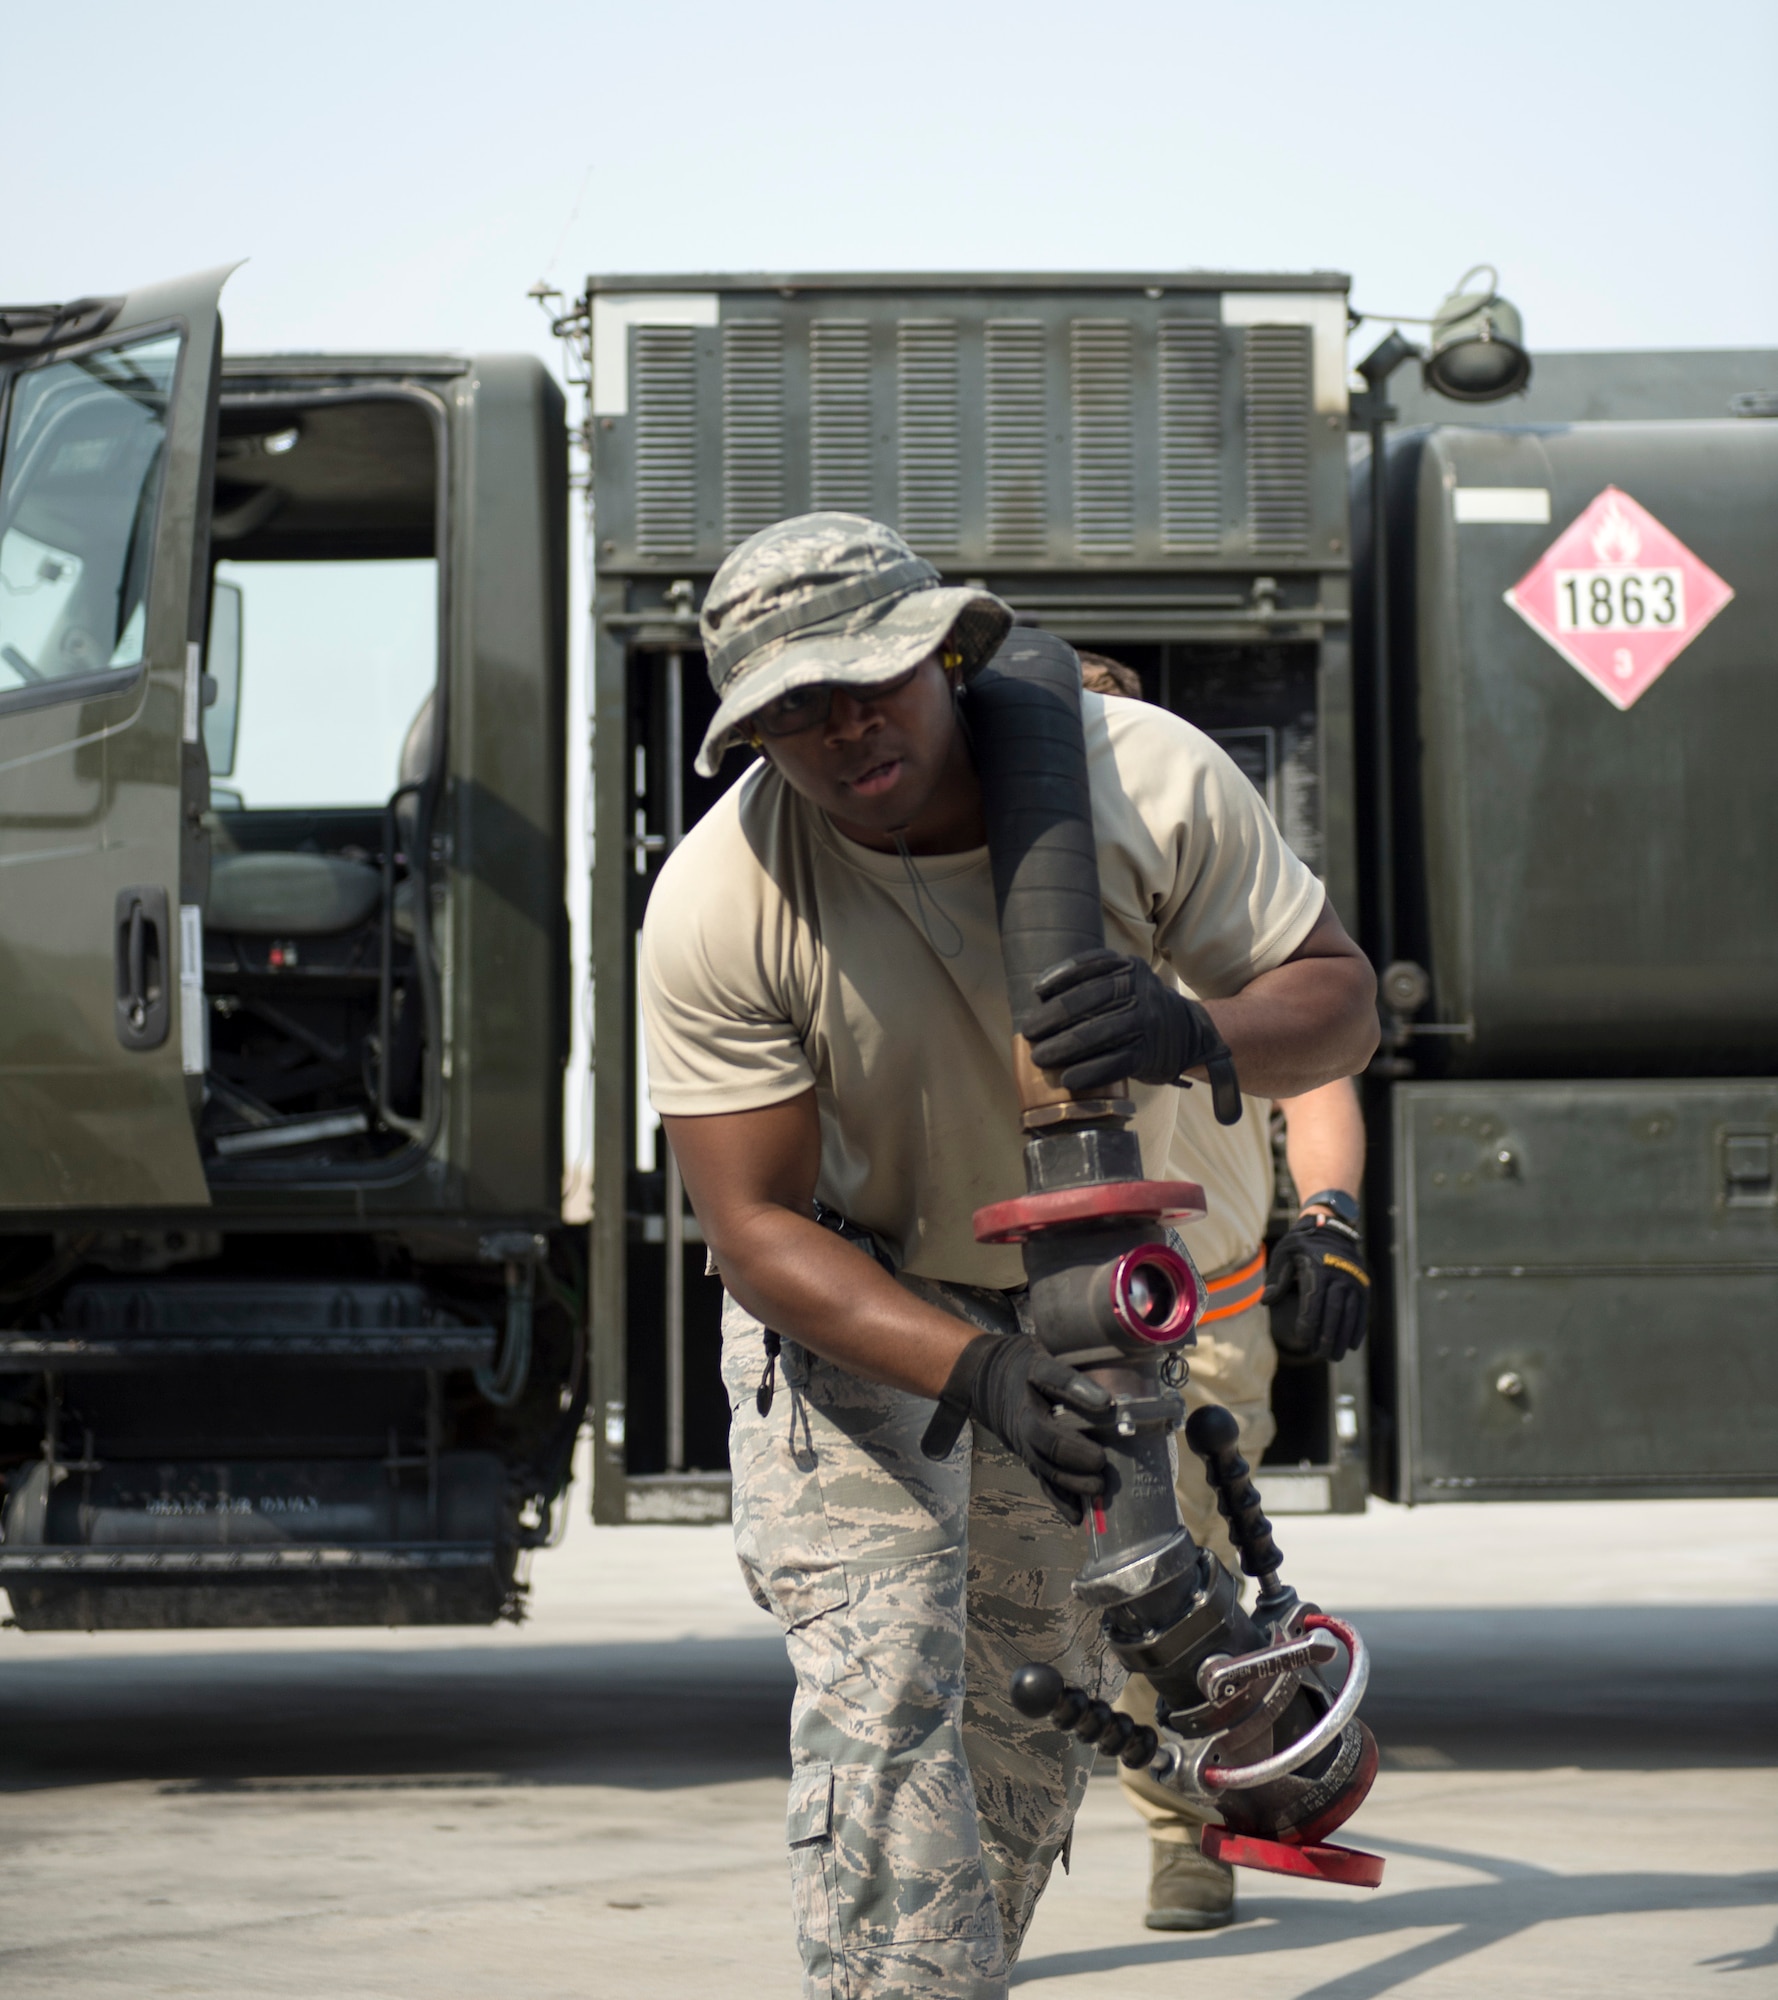 U.S Air Force Tech. Sgt. Jason Johnson, a fuels specialist with the 379th Expeditionary Logistics Readiness Squadron, Fuels Management Flight, carries a fuel hose at Al Udeid Air Base, Qatar, July 24, 2017.